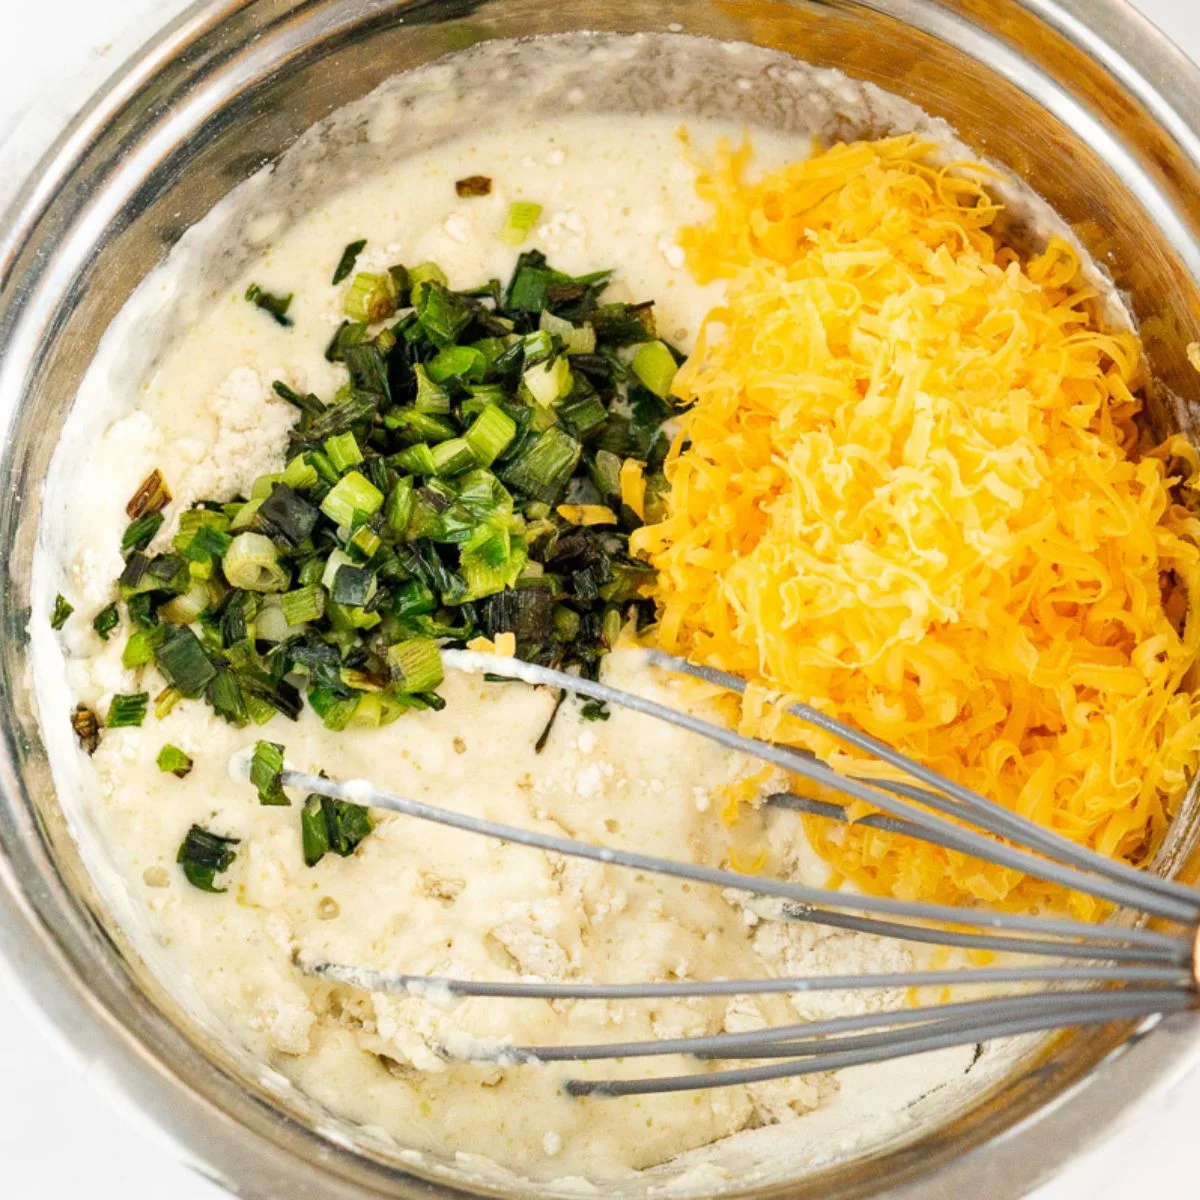 Adding shredded cheese and sauteed scallions to pancake batter